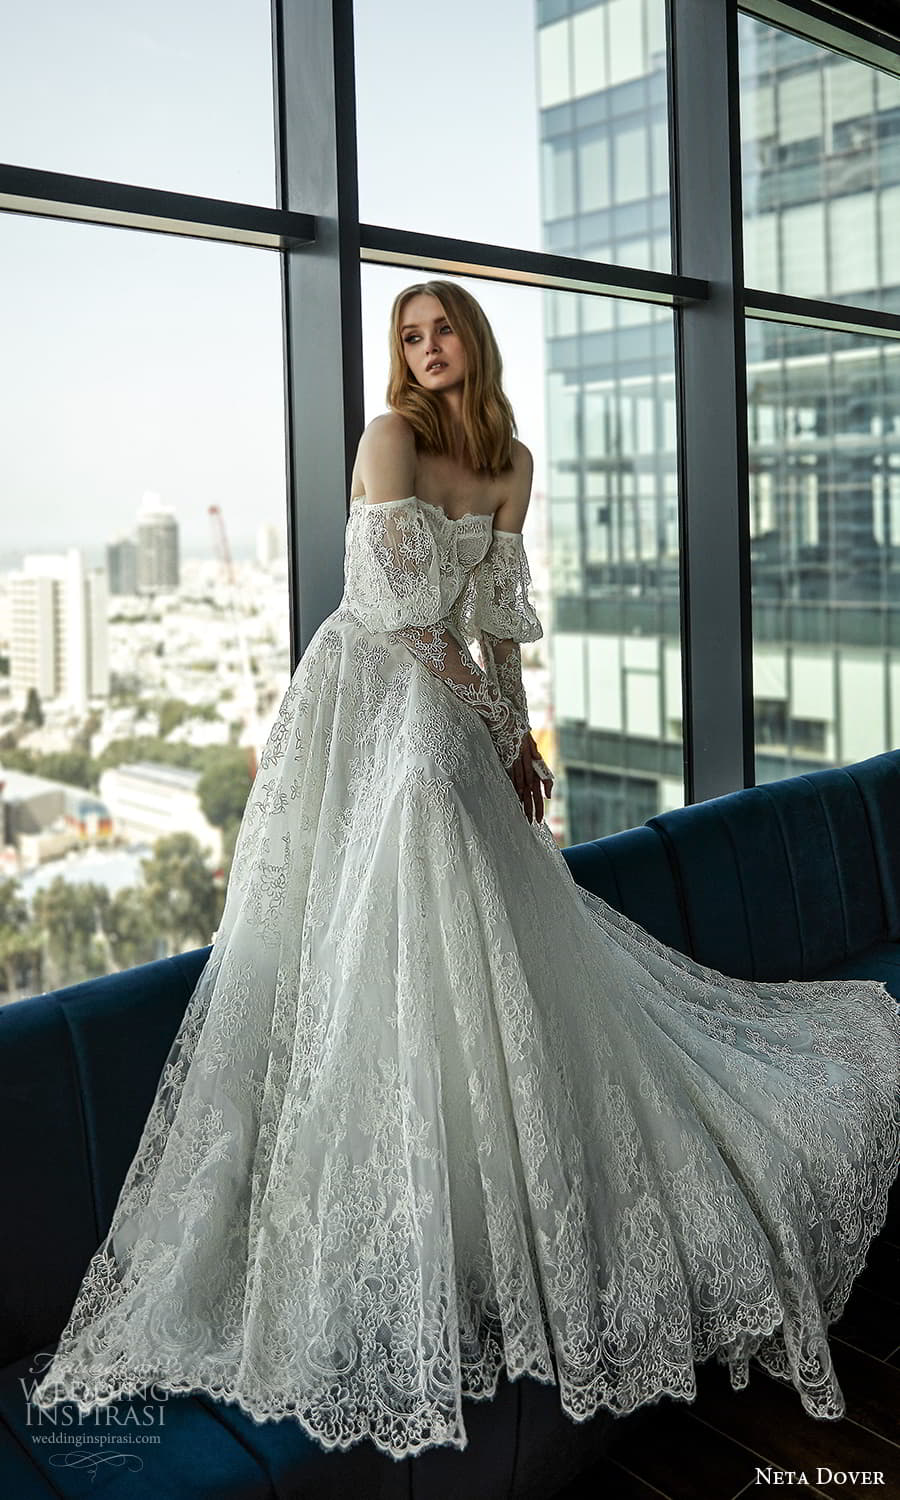 neta dover finesse 2022 bridal sheer detached puff sleeve strapless sweetheart neckline embellished lace a line ball gown wedding dress chapel train (6) mv